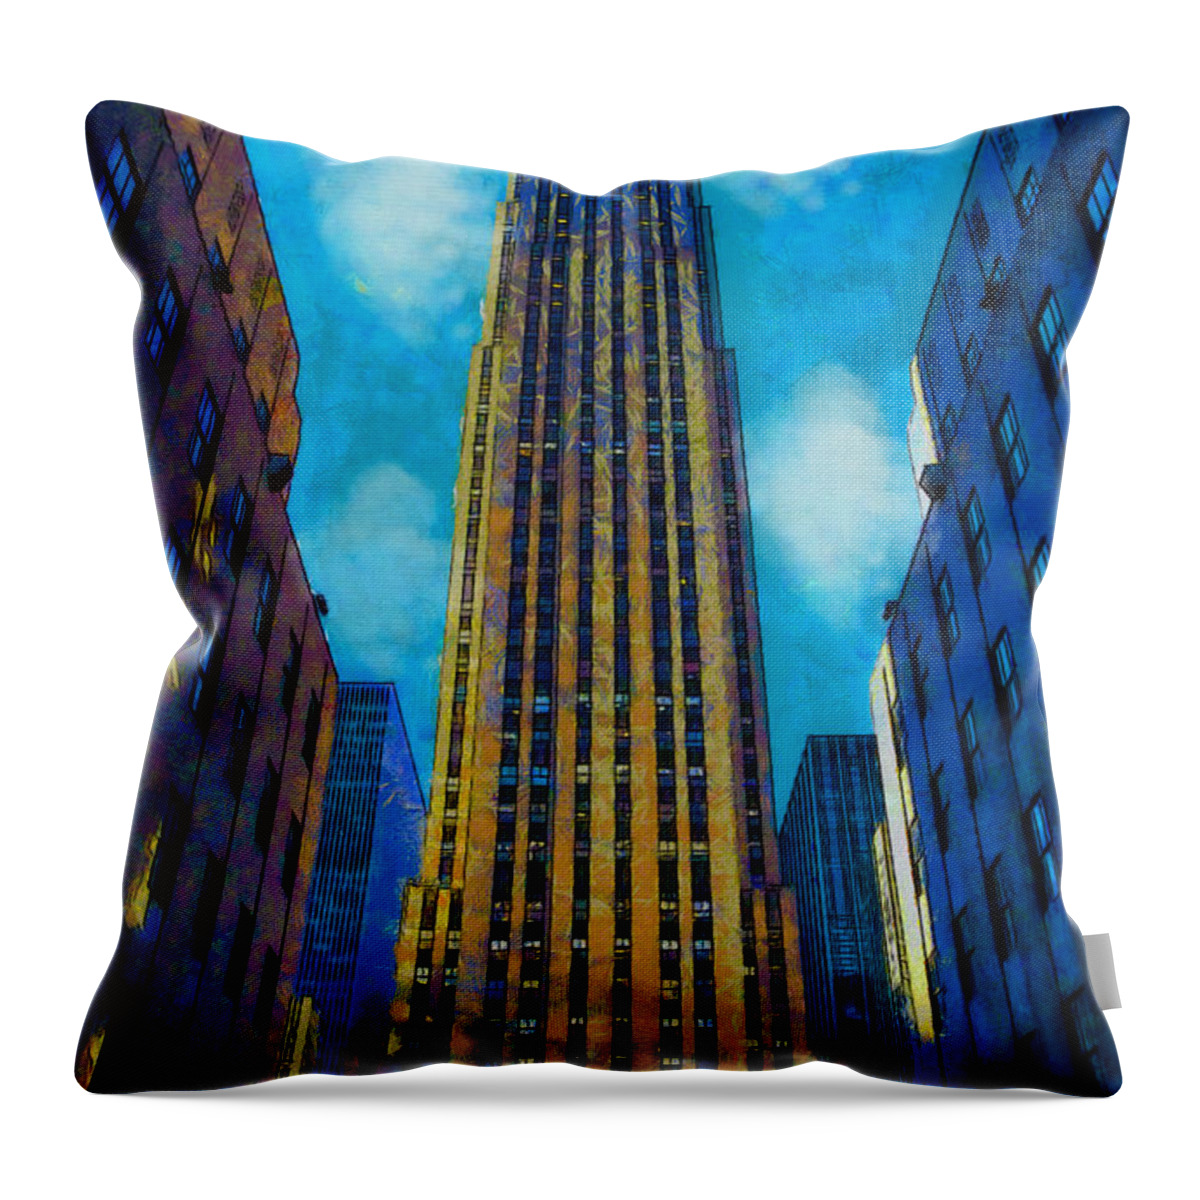 30 Rock Throw Pillow featuring the painting 30 Rock by Kai Saarto